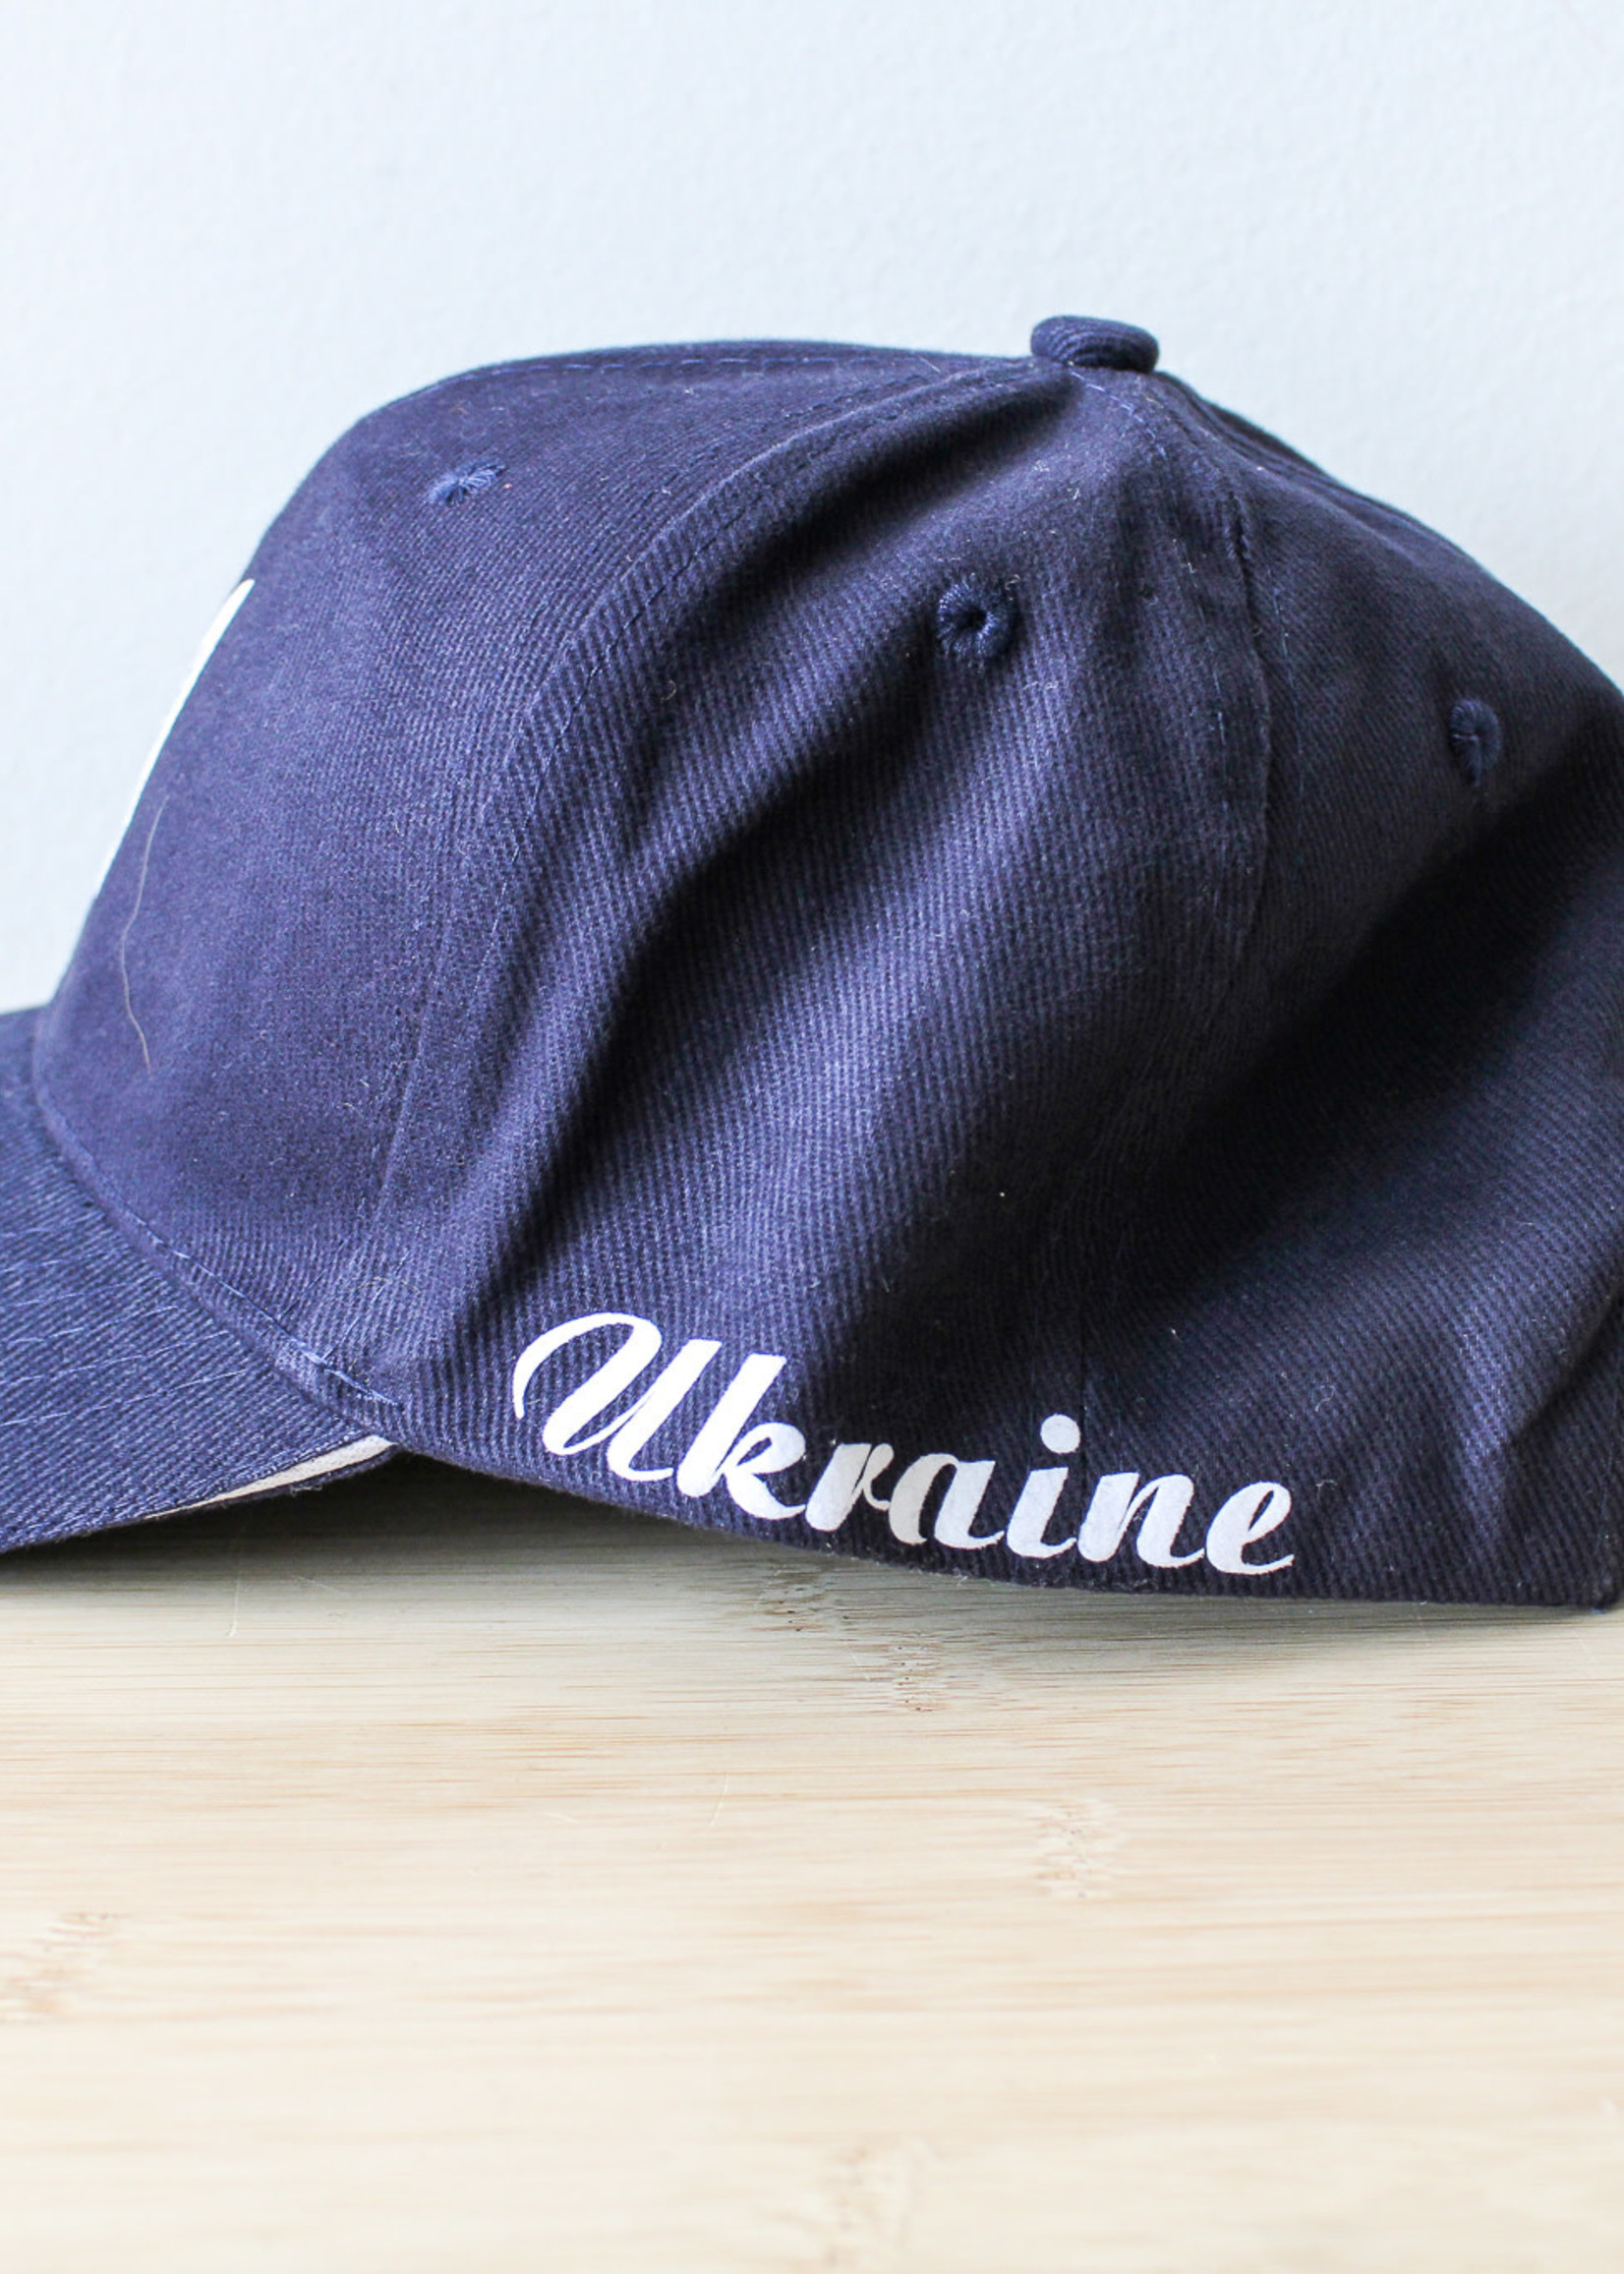 CAP  -Navy Blue  Baseball hat  with  Tryzub and  sign  Ukraine